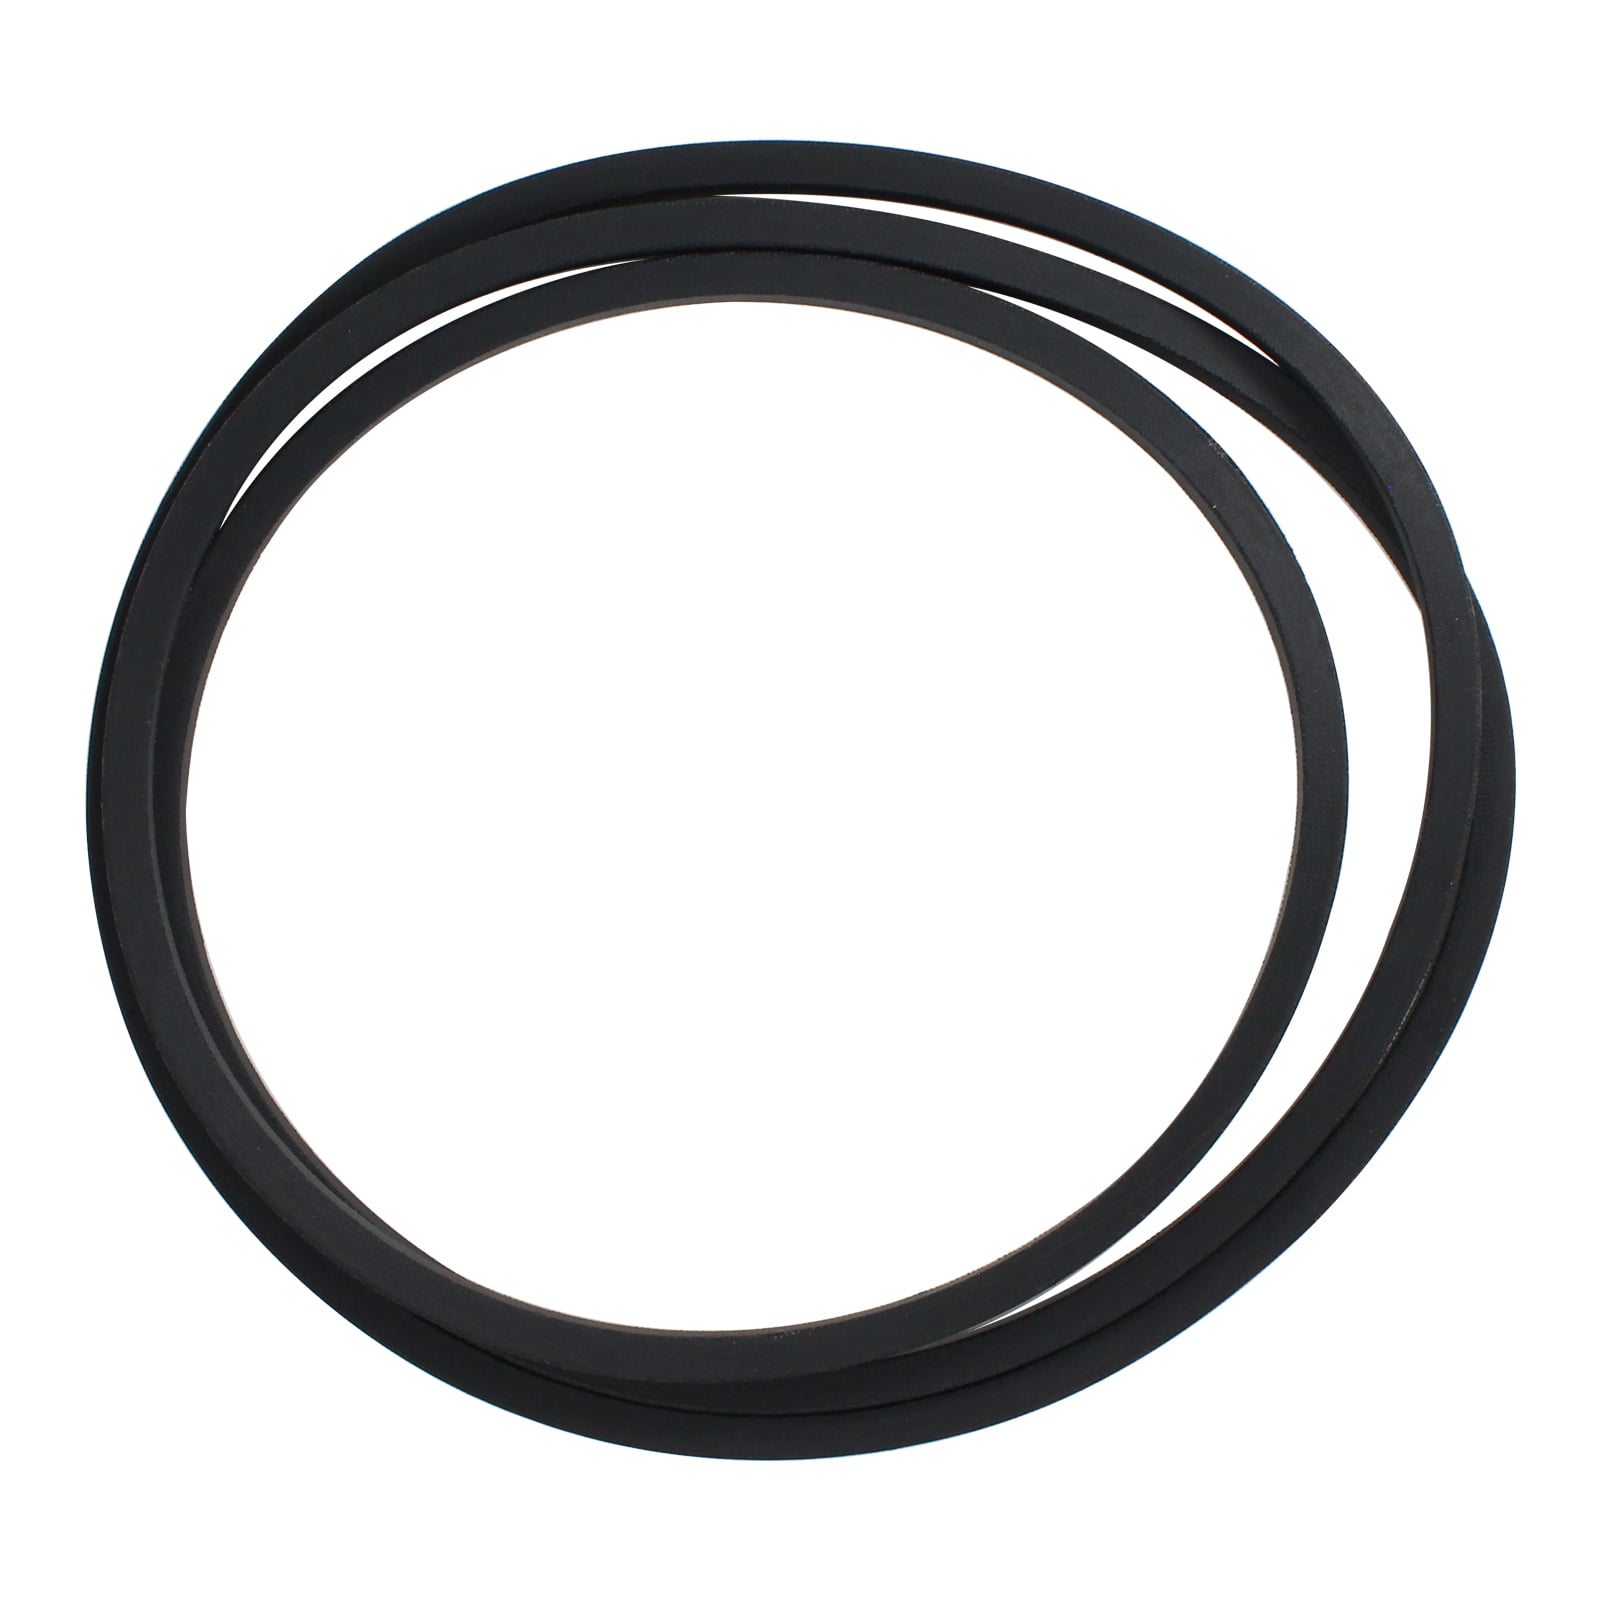 Compatible with 532193214 38 inch Mower Deck Belt Lawn Mower 2-Pack 193214 Drive Belt Replacement for Weed Eater HD13538 96016000100